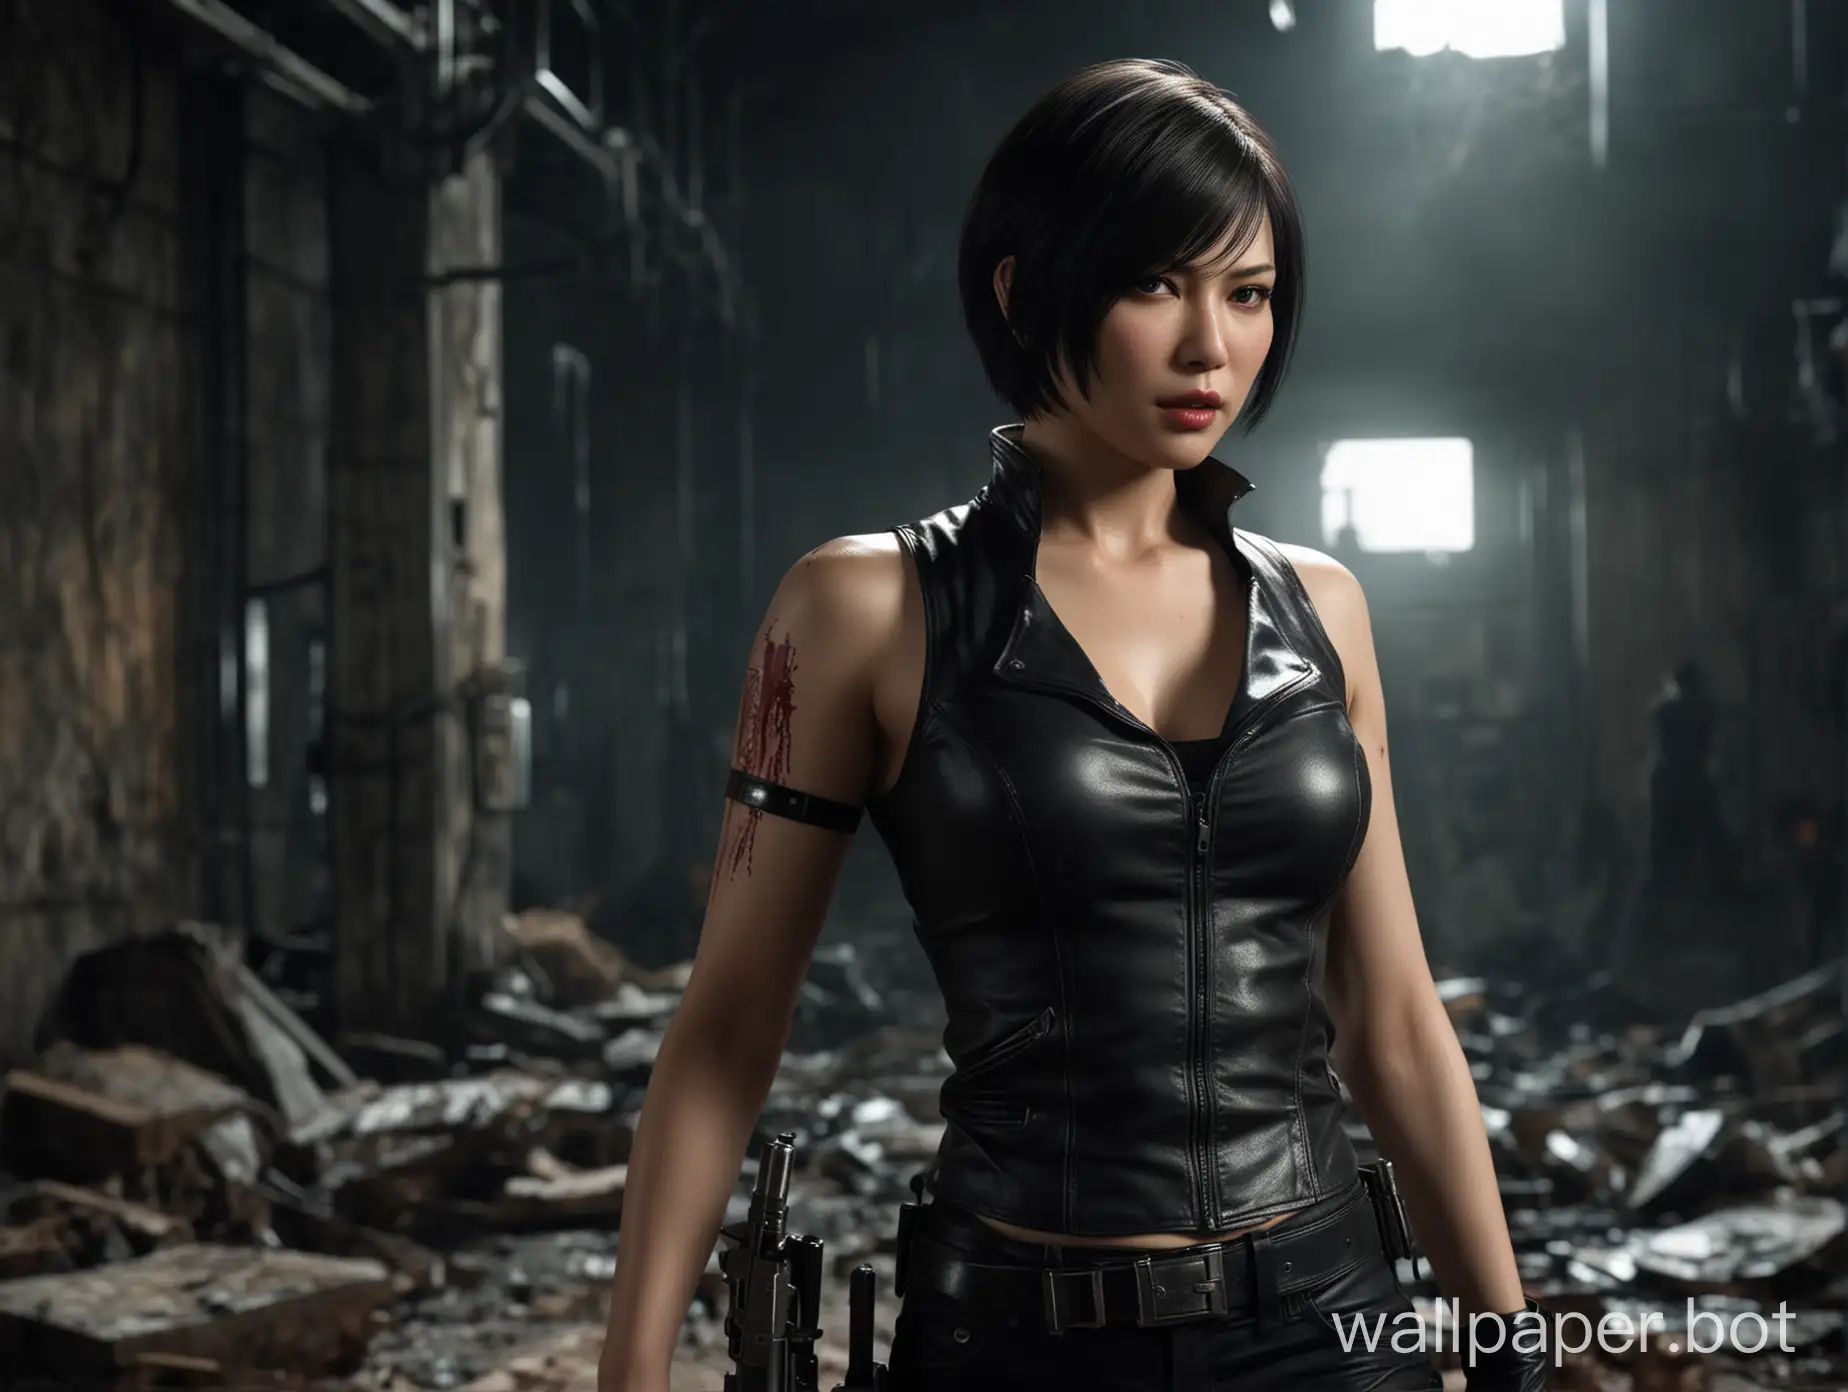 Ada Wong in a black leather top, short hair, revolver in hand, dark background, walks through a ruined laboratory.